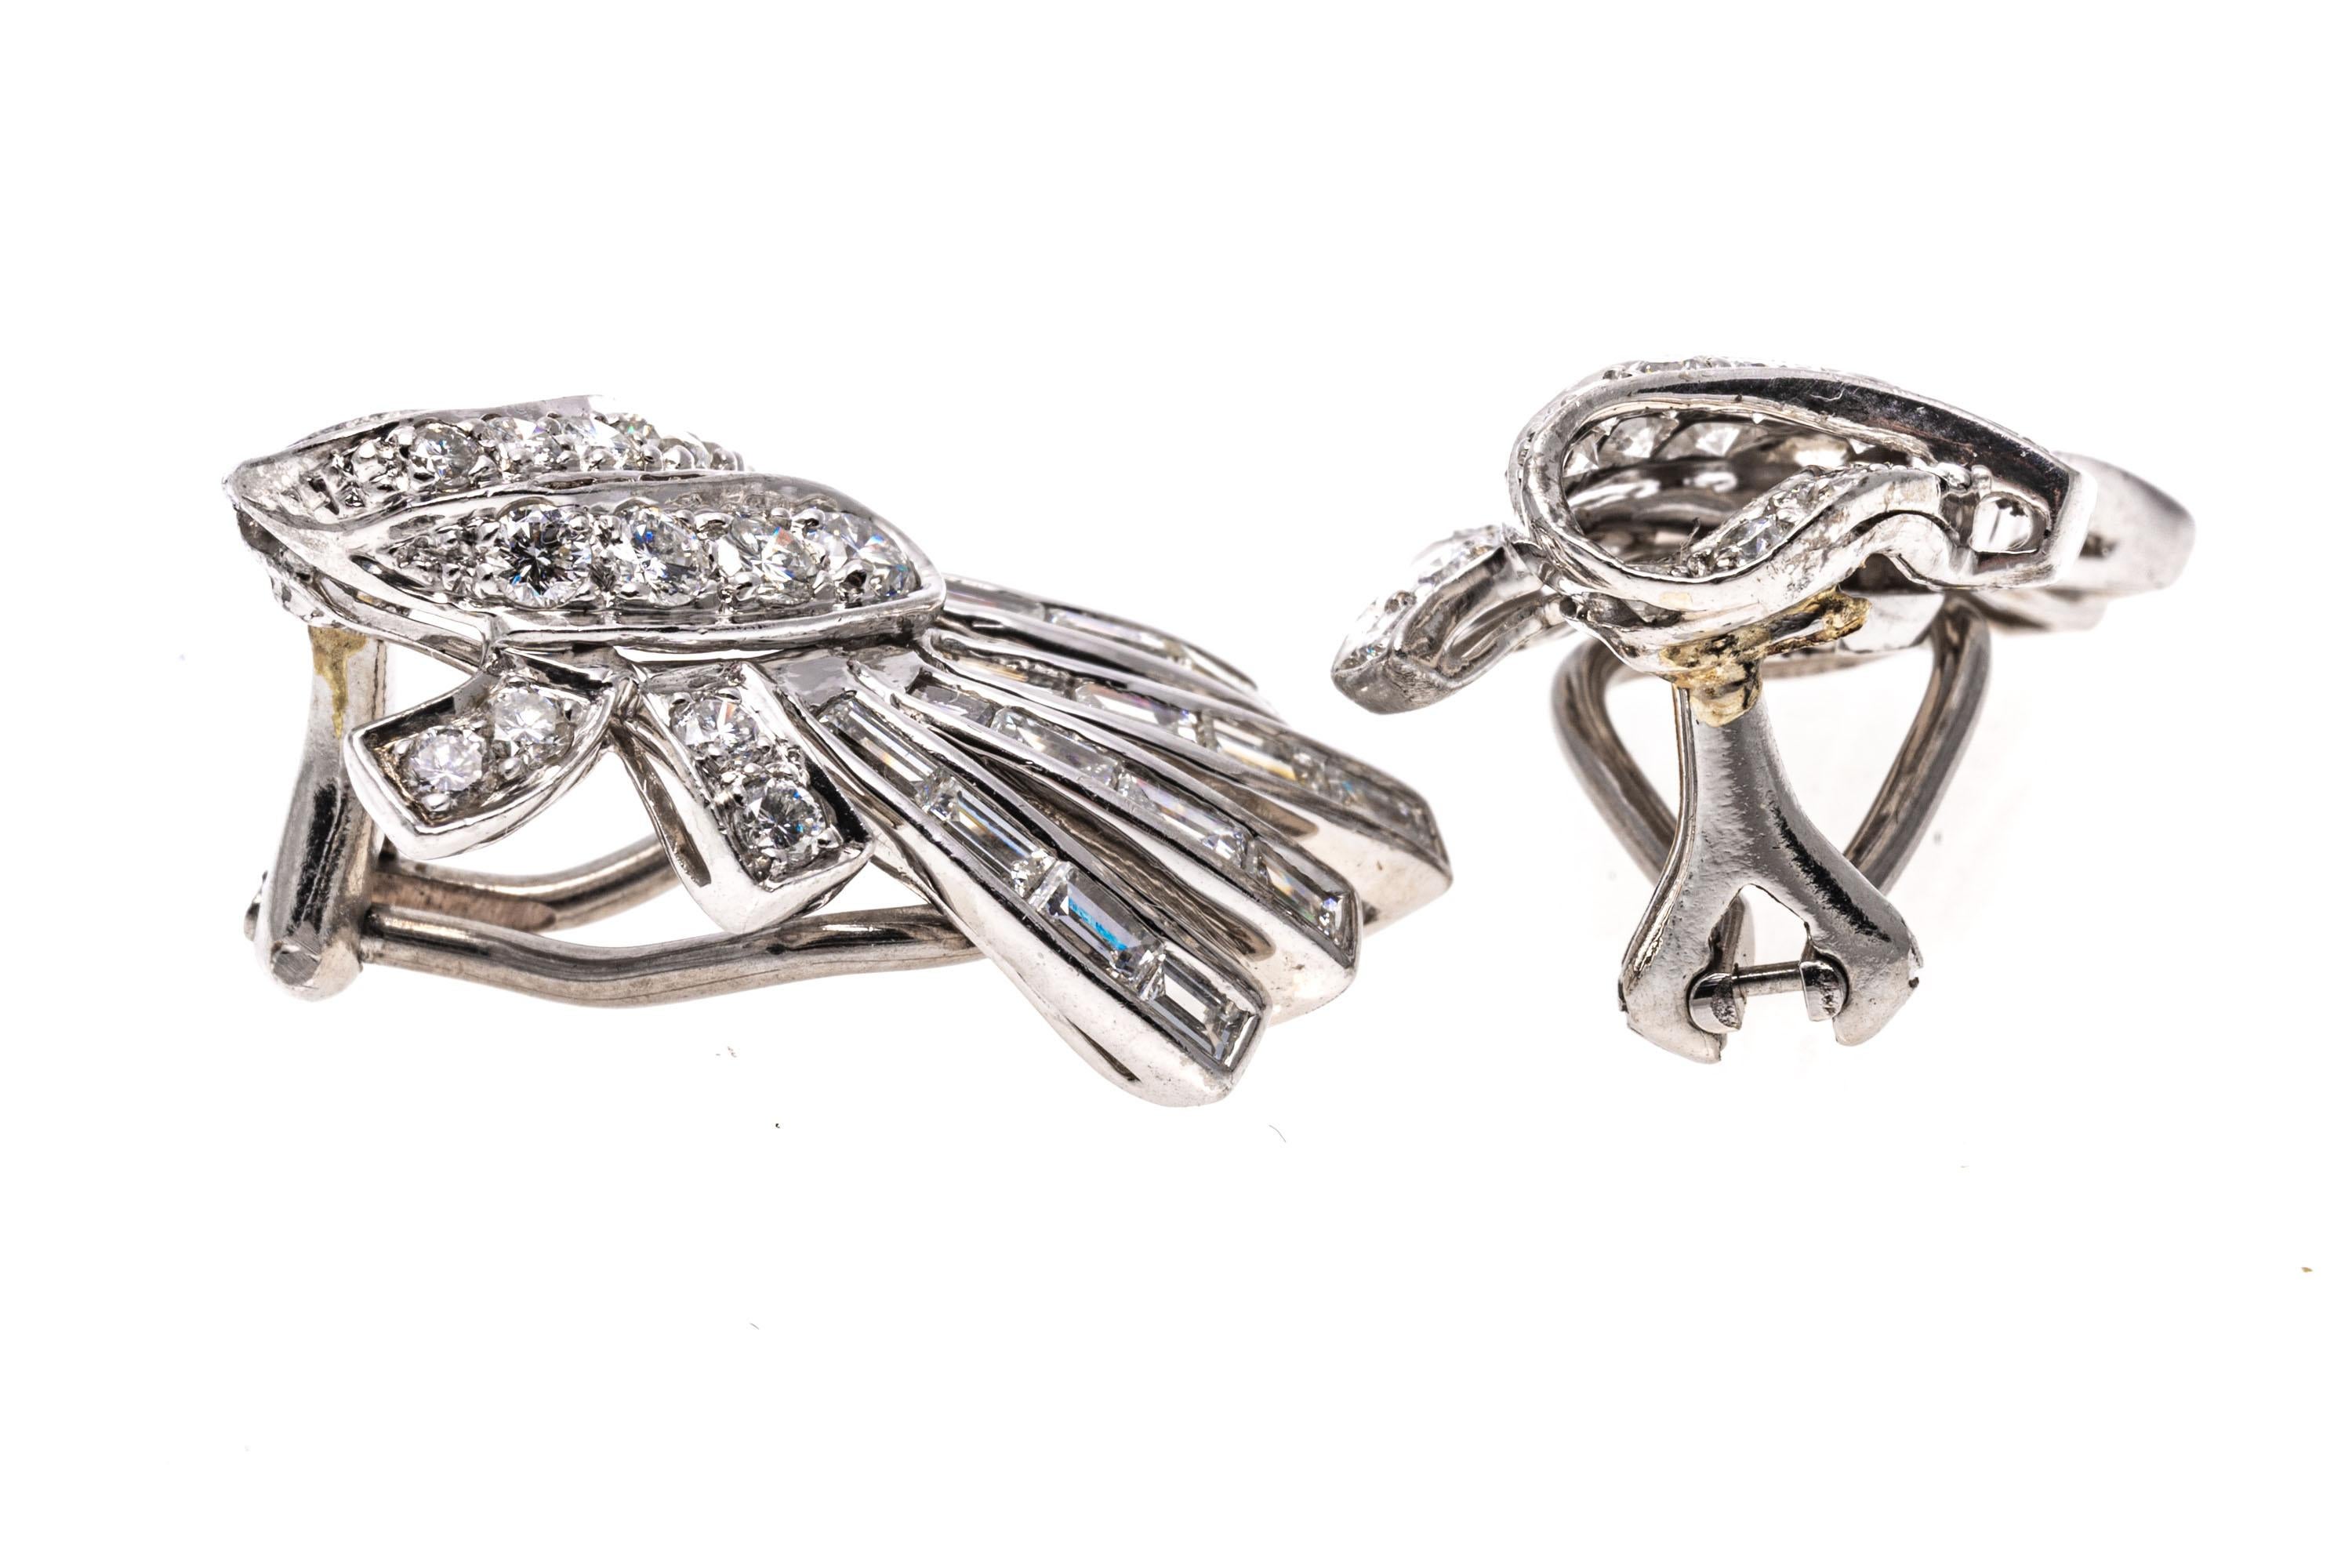 Platinum earrings. These gorgeous earrings are a fringed knot motif, set with rows of channel set, baguette shaped diamonds, bezel set, approximately 0.80 TCW, which act as the fringe. Offsetting the baguettes is a folded over knot motif, set with